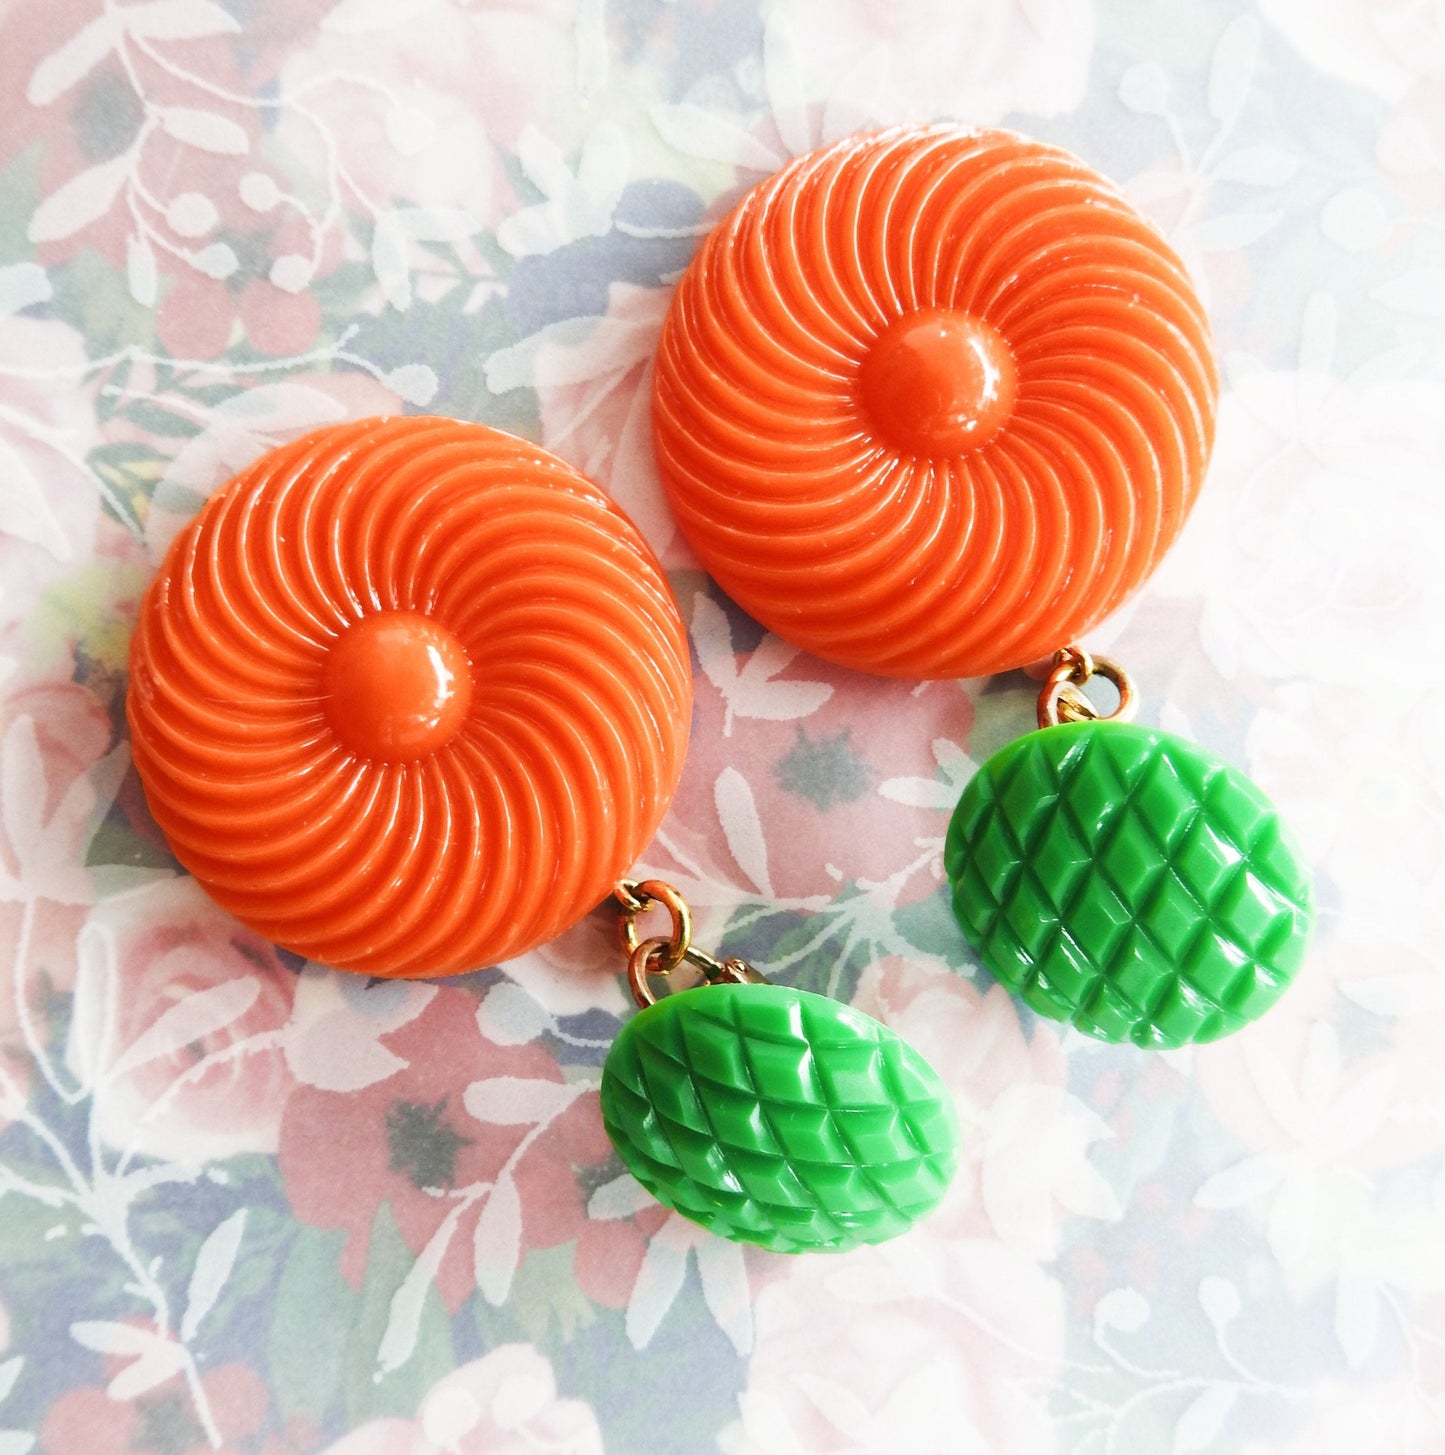 Neon orange dangle clip earrings for women. Cool jewelry gift ideas under 25 dollars. 1970s 1980s-inspired funky style. Ready to ship